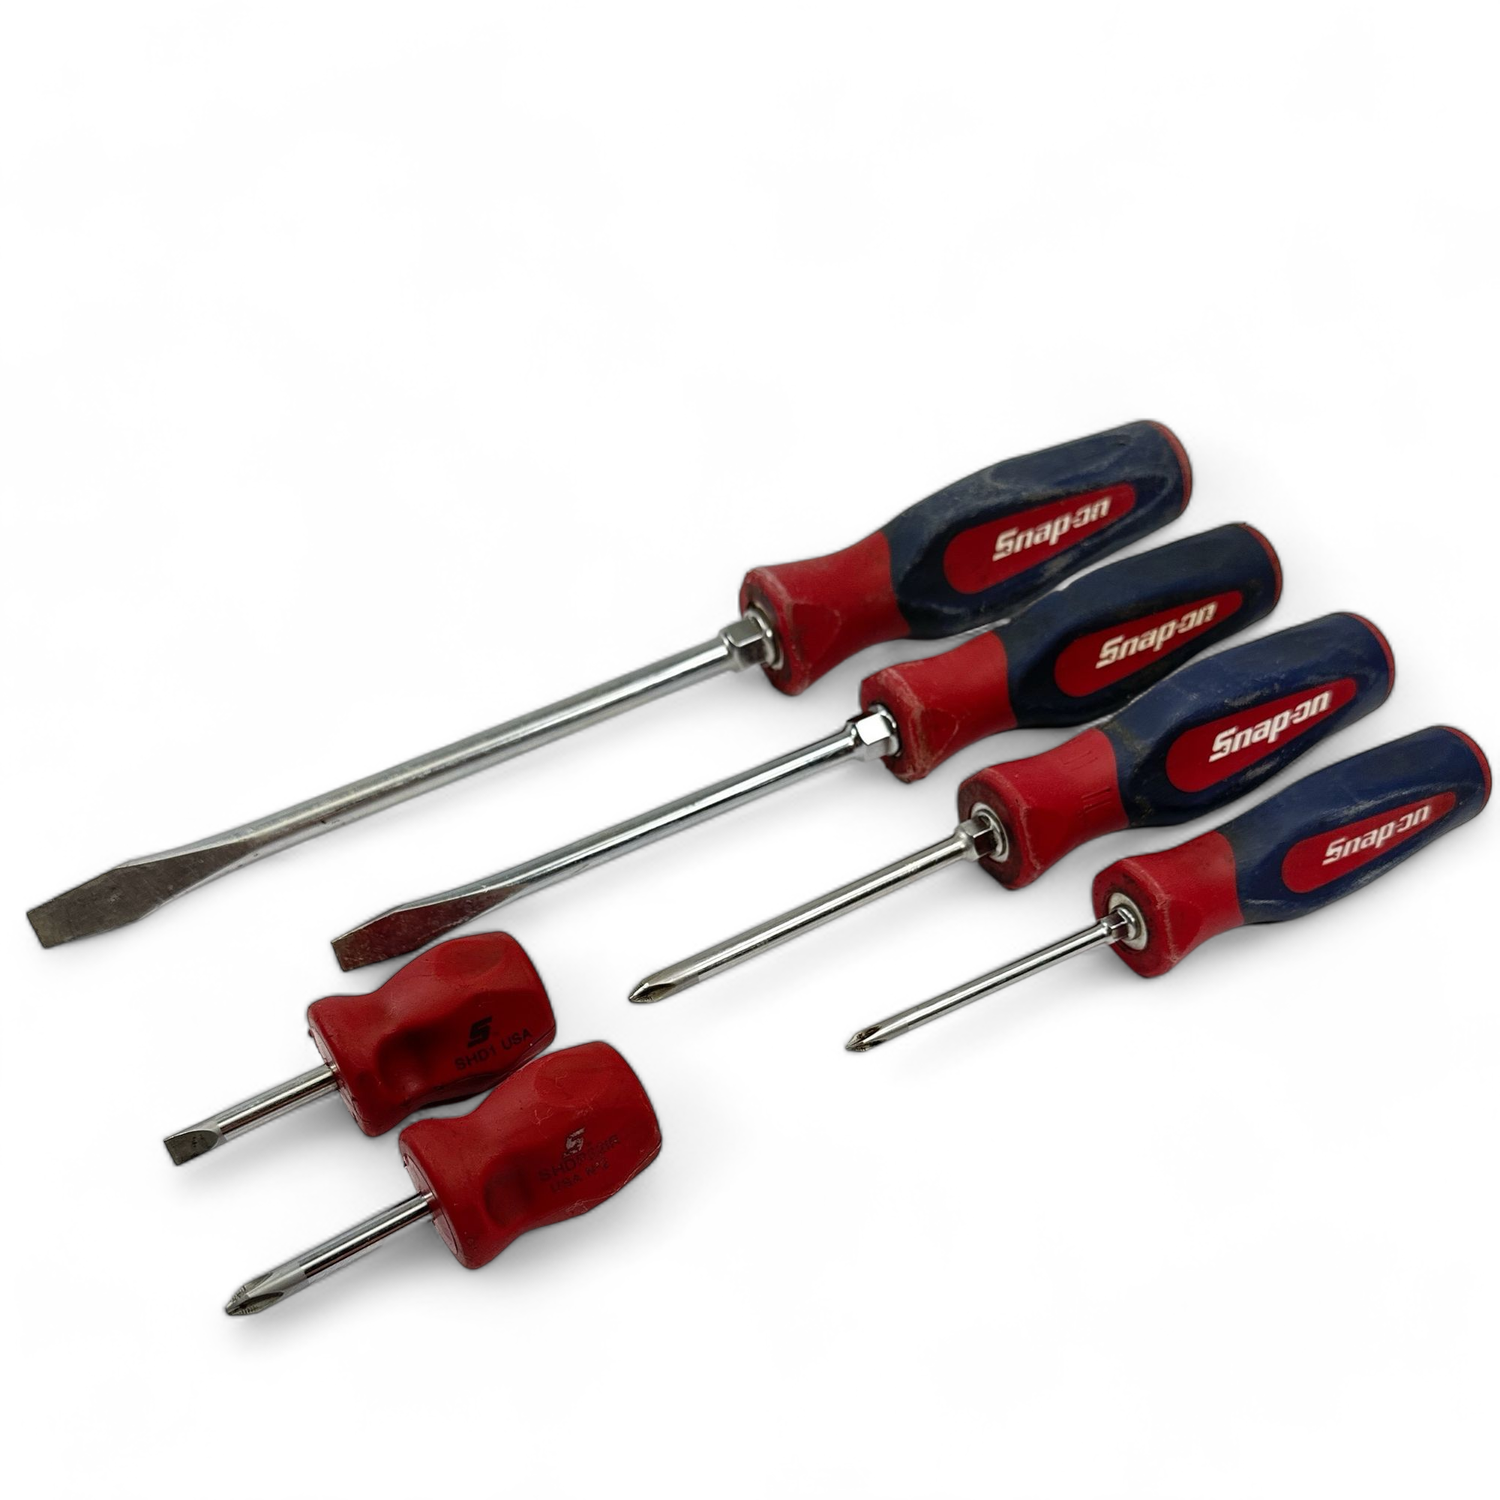 Snap On Red, White & Blue Screwdriver Set